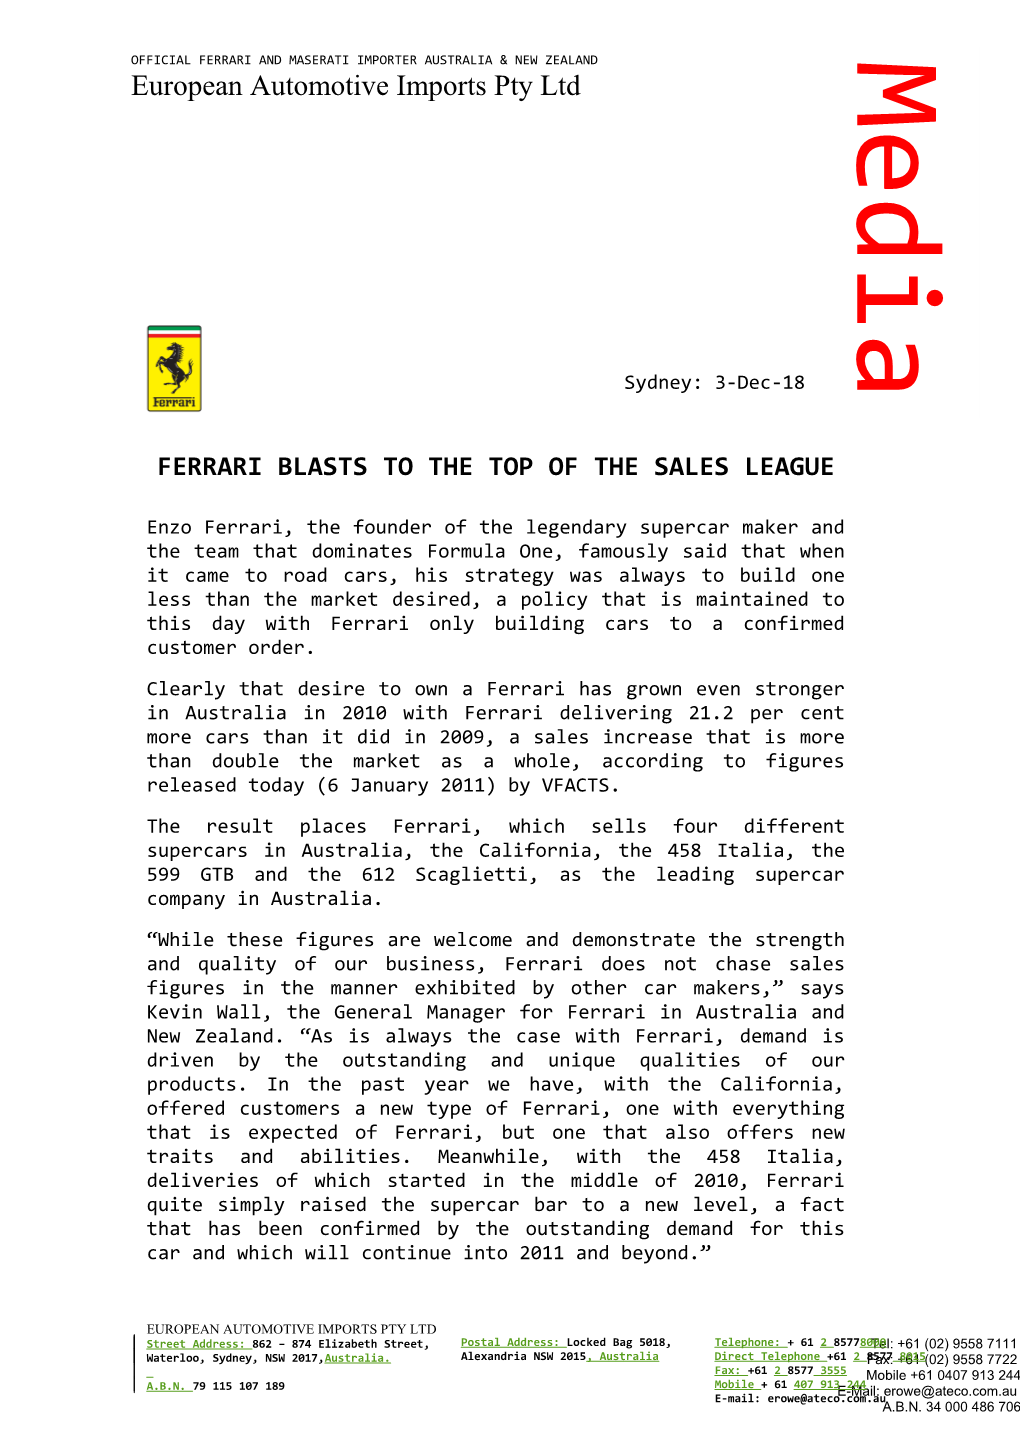 Ferrari Blasts to the Top of the Sales League